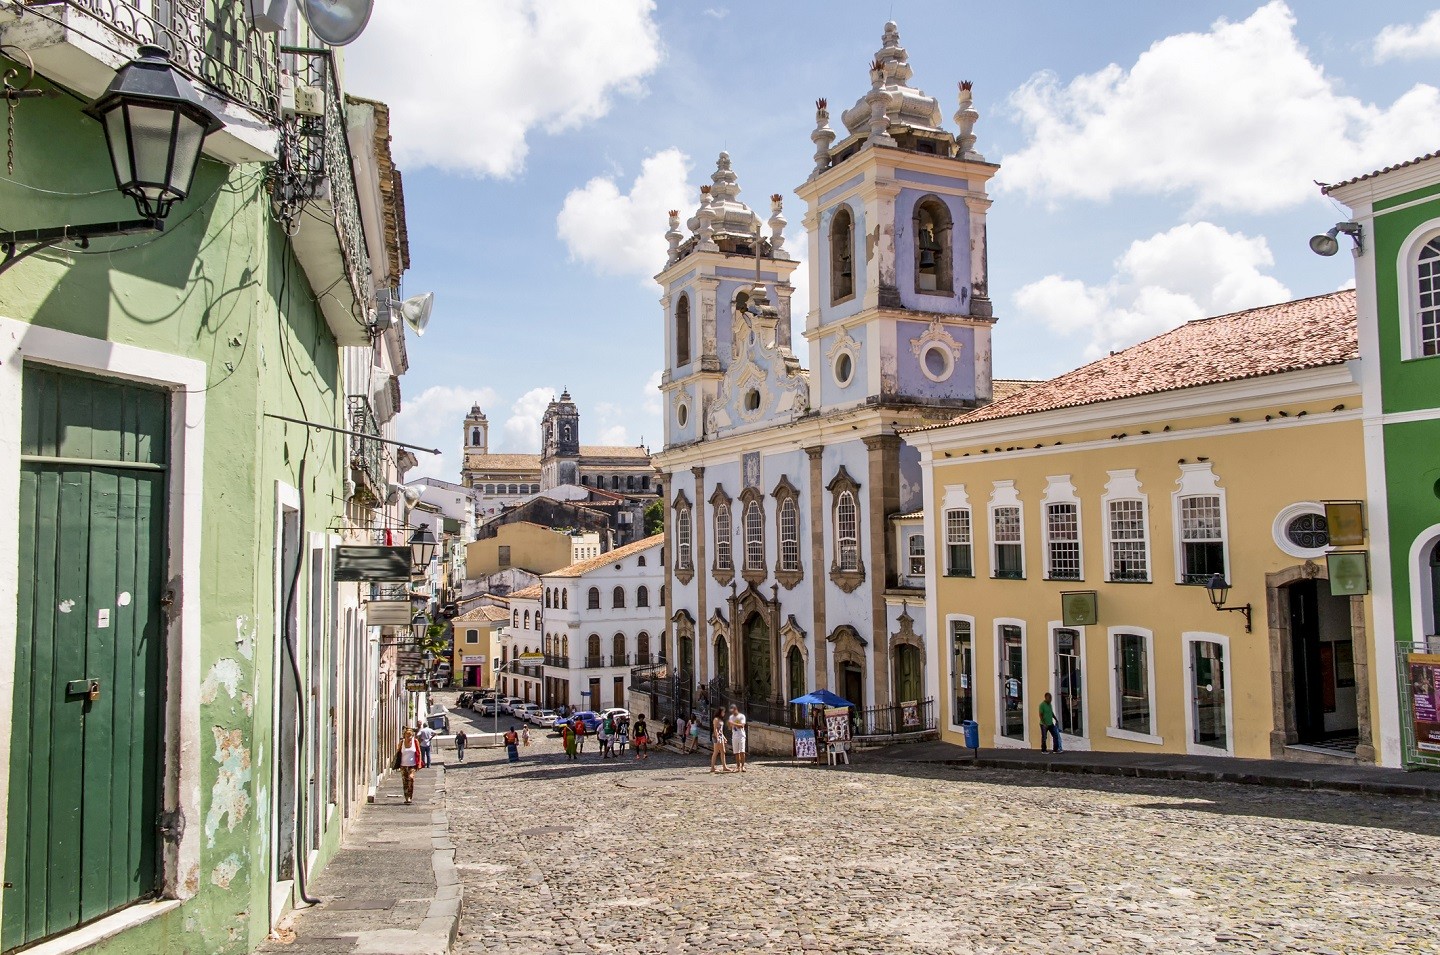 The Historic Centre (known in Portuguese as The Pelourinho) is a historic neighborhood located in the western zone of Salvador, Bahia. It was the citys center during the Portuguese Colonial Period, and was named for the whipping post (Pelourinho means Pil (Foto: Getty Images)